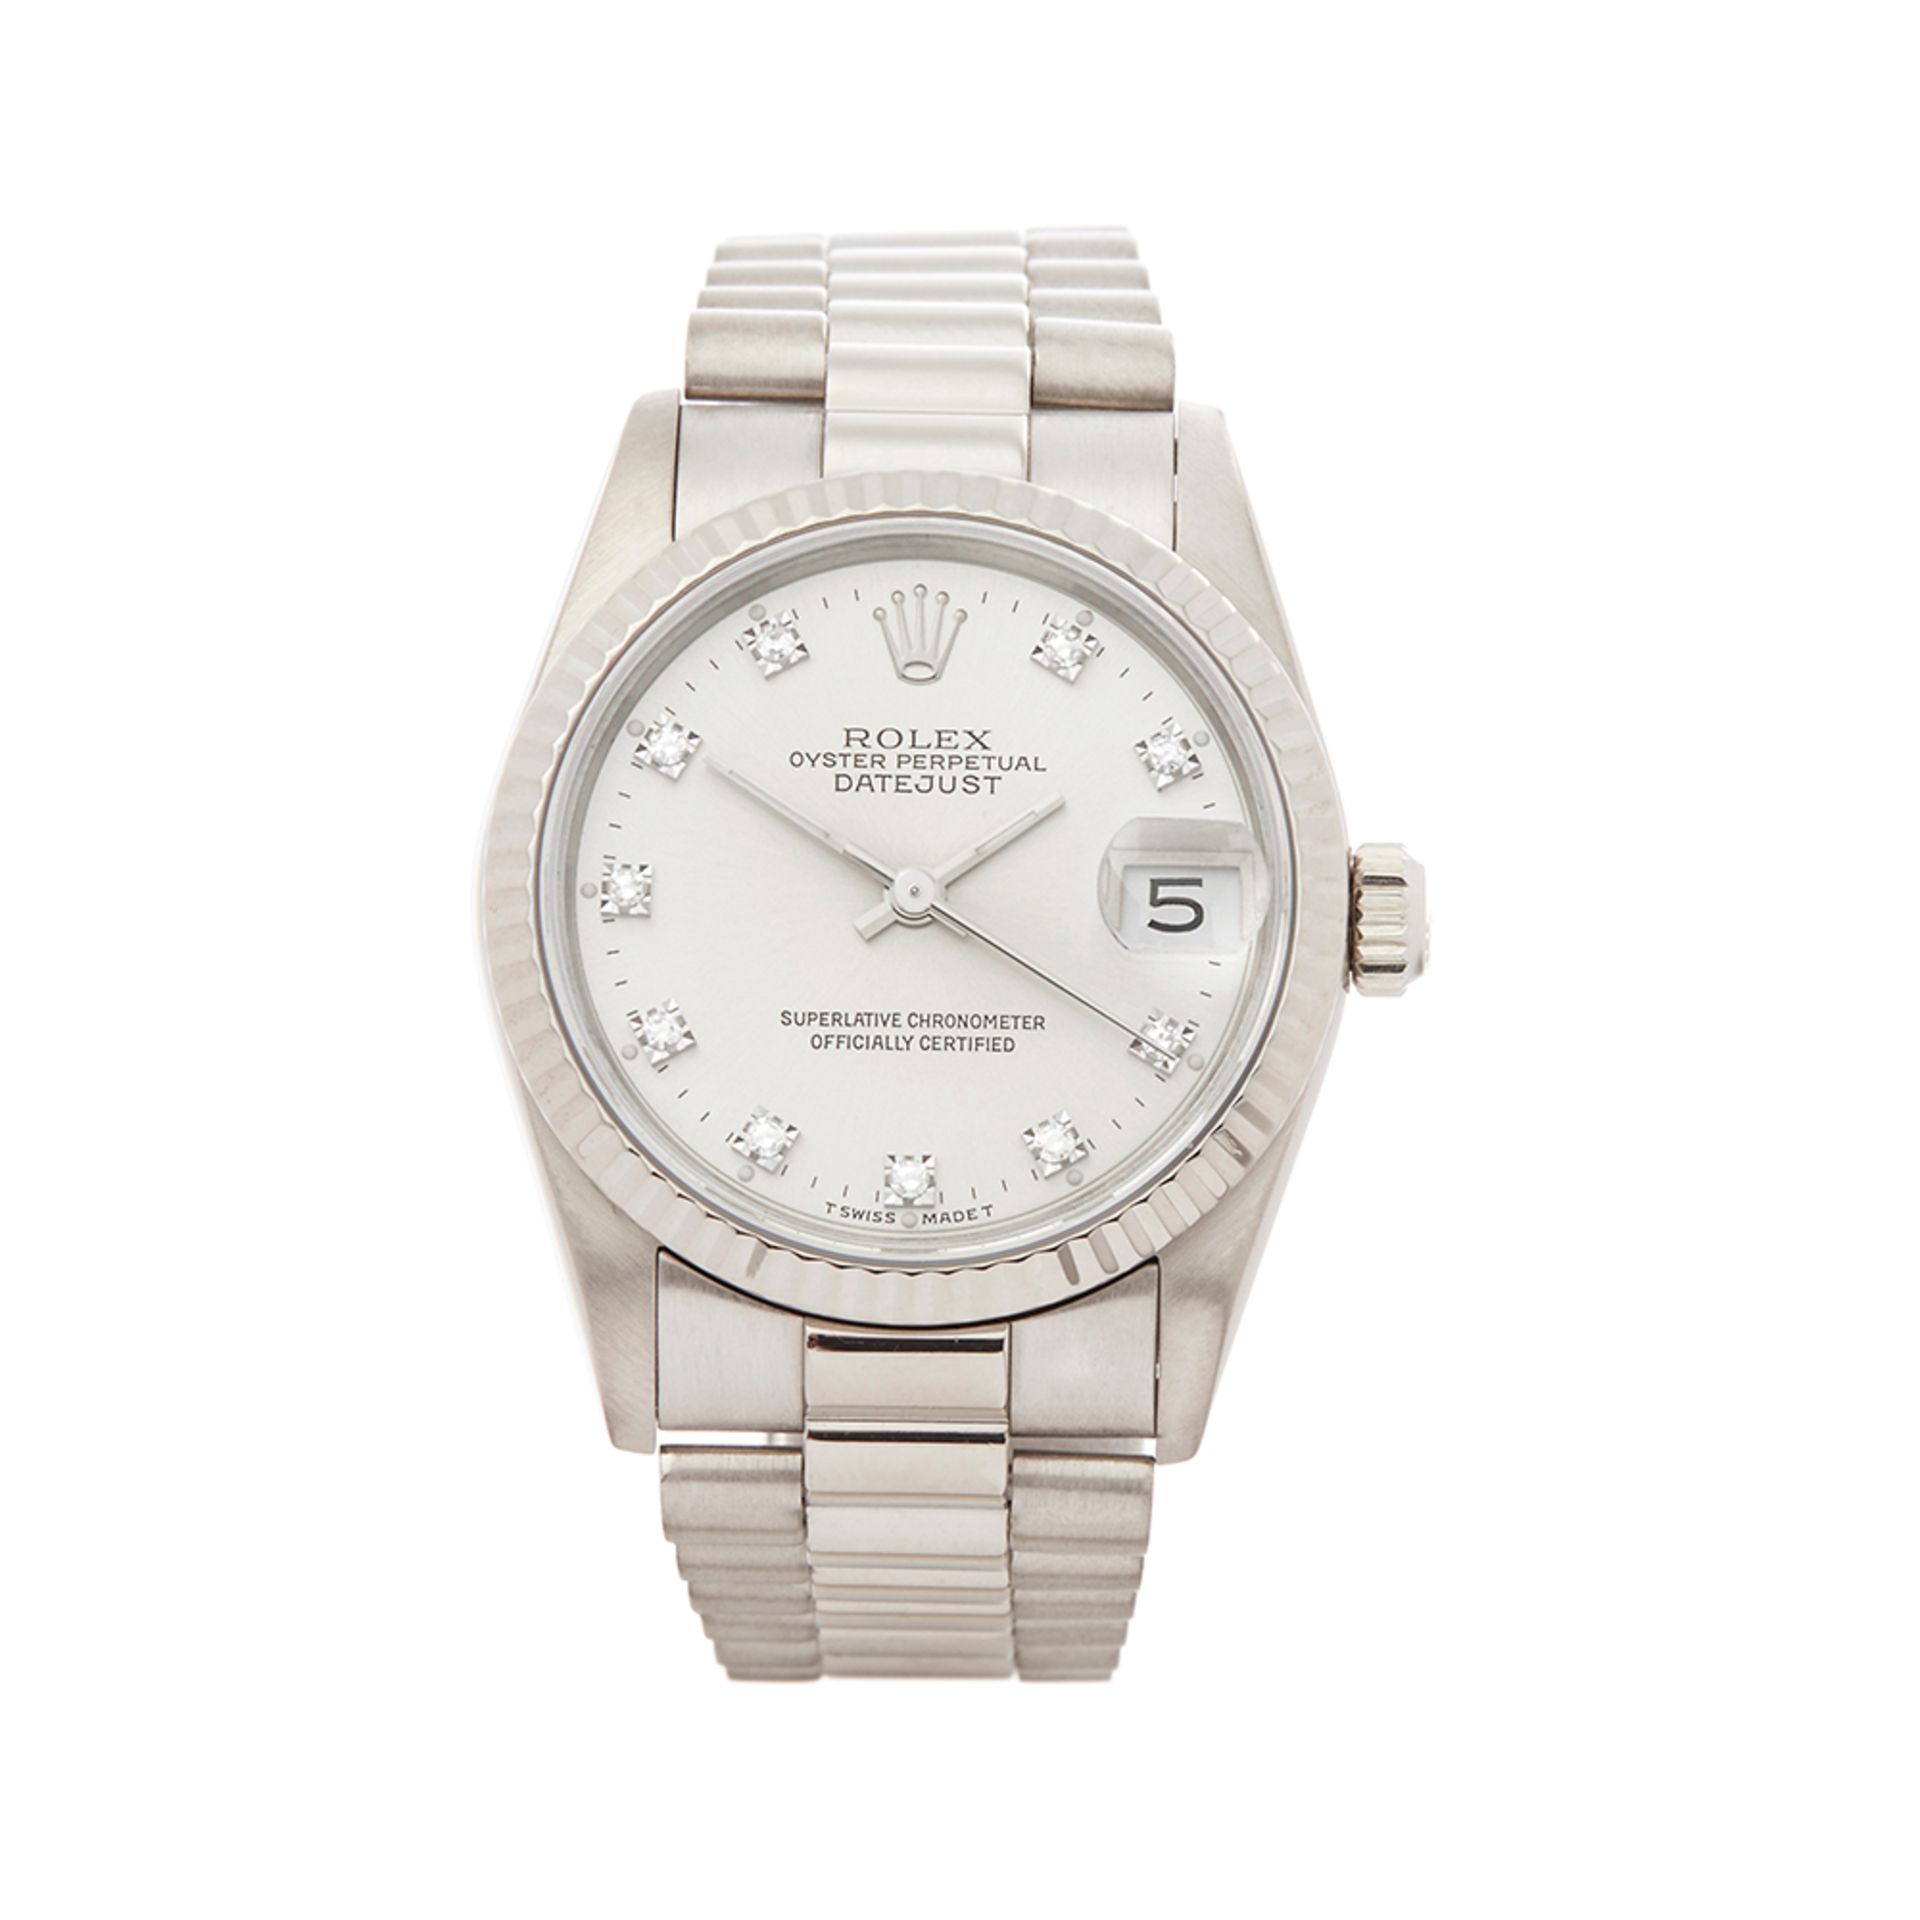 Rolex Datejust 31mm 18k White Gold - 68279 - Image 2 of 7